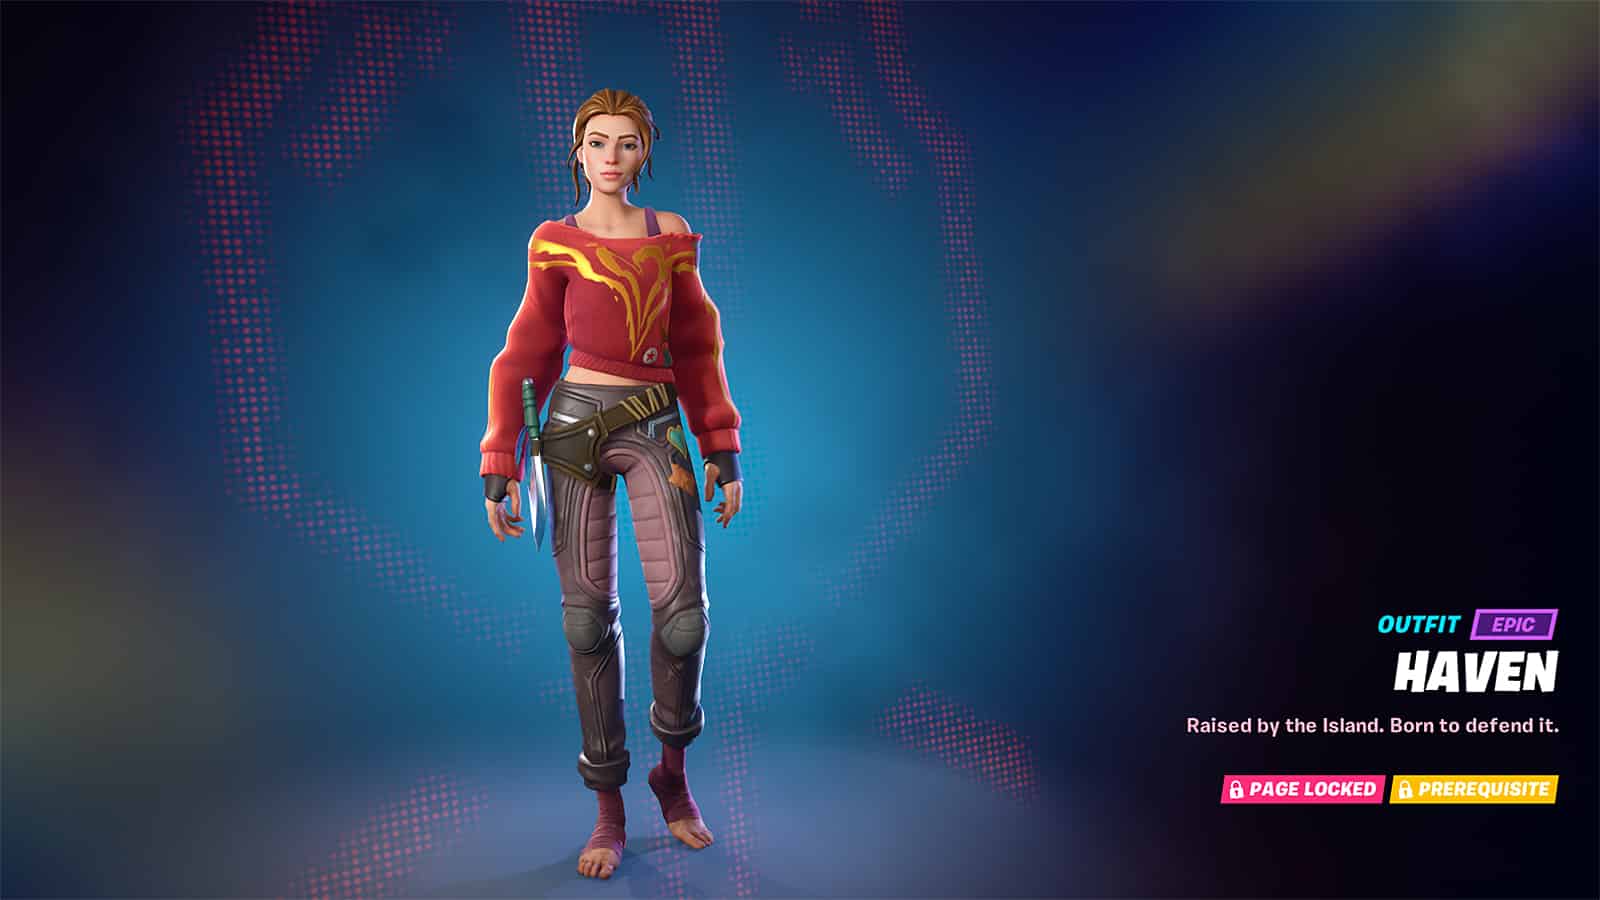 An image of Haven, one of the skins in Fortnite Chapter 3